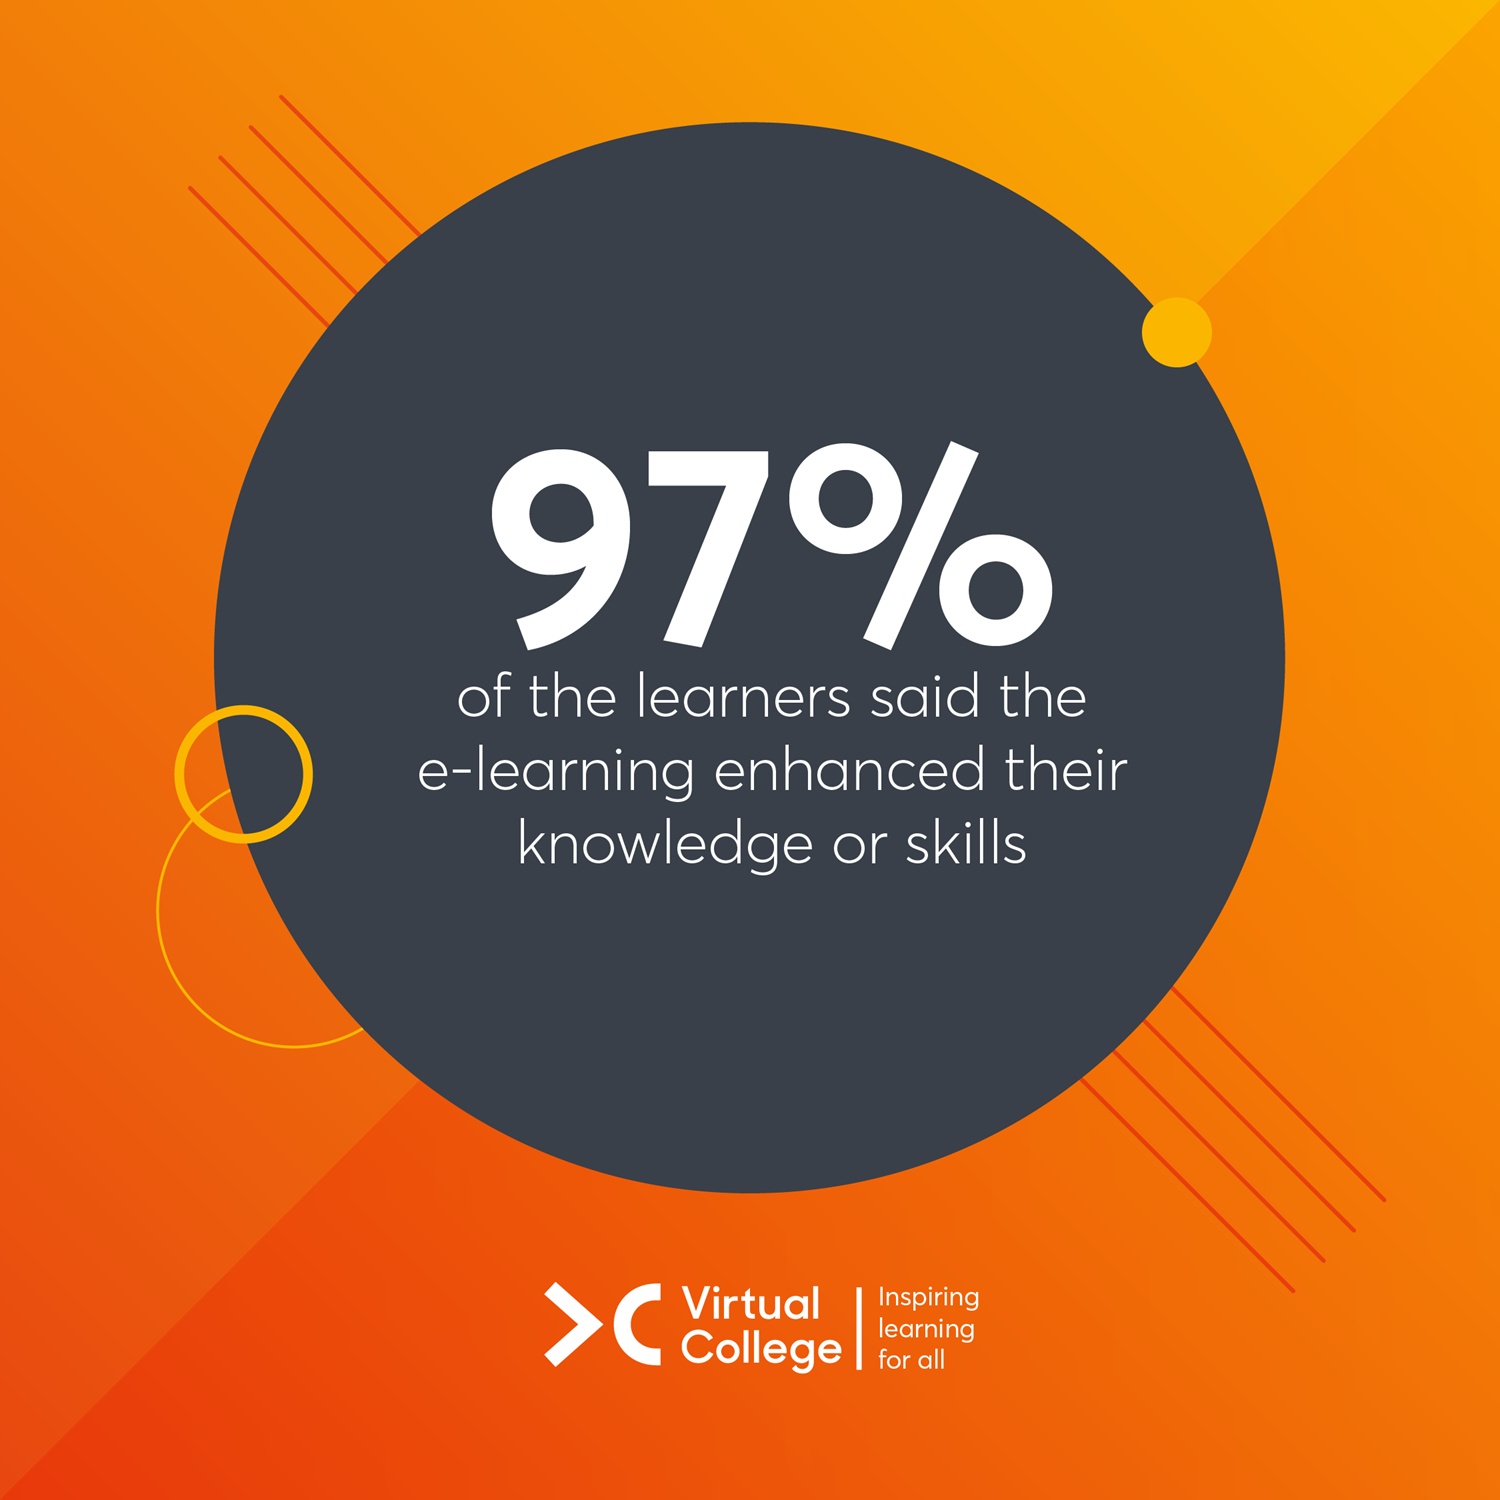 97% of the learners said the e-learning enhanced their knowledge or skills